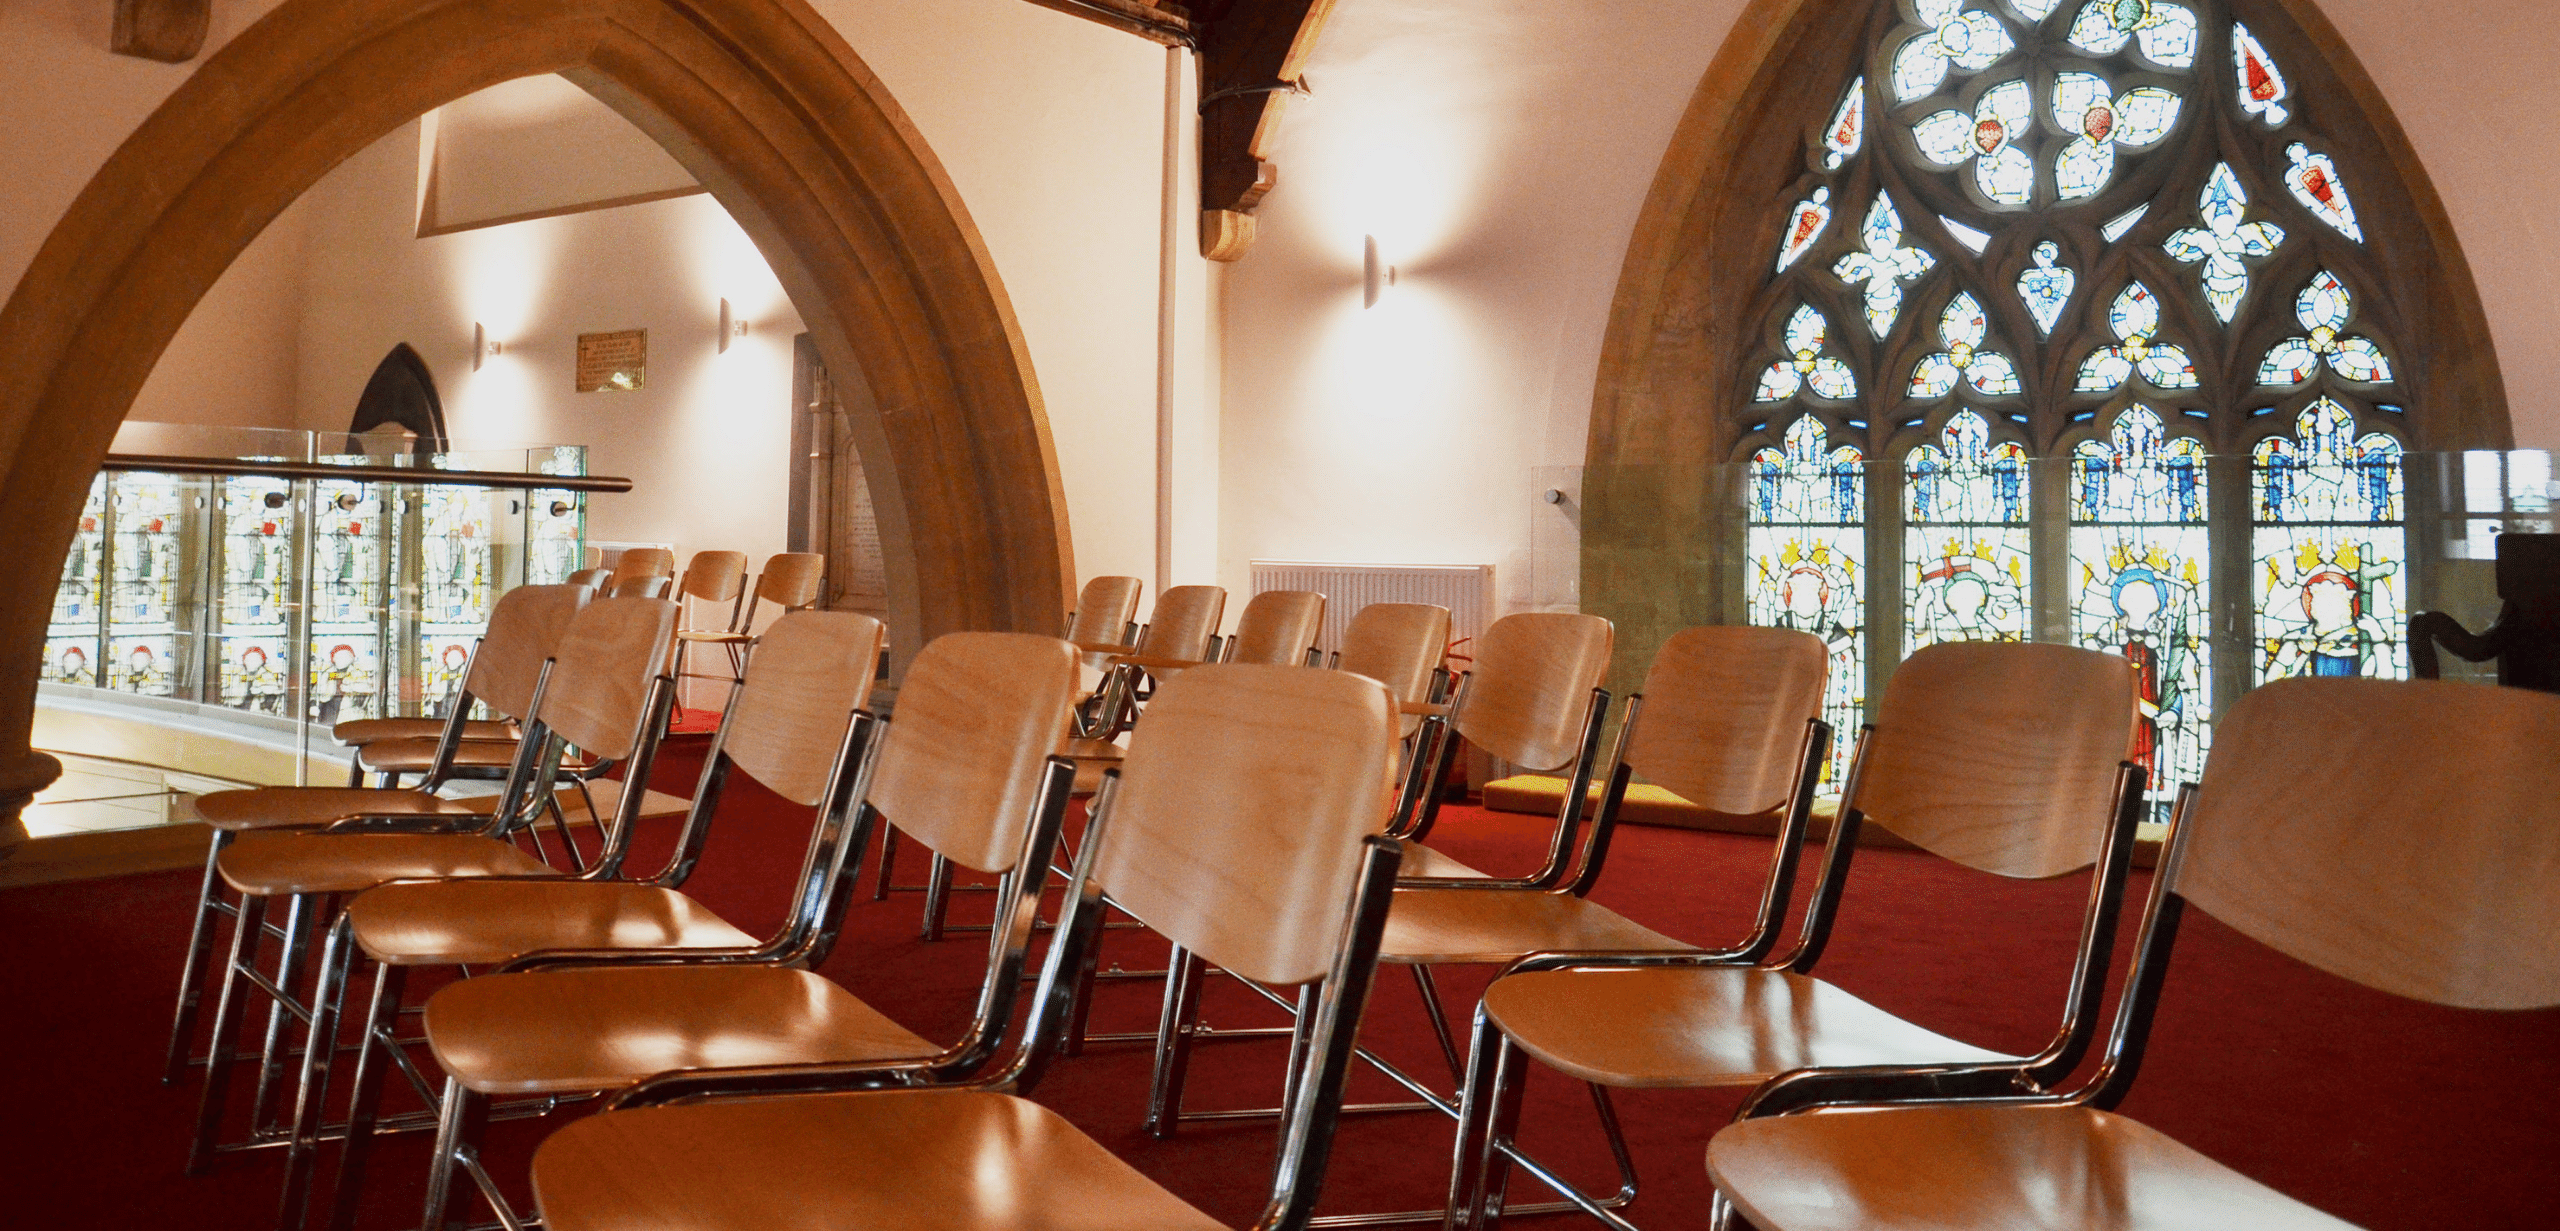 Rows of chairs in a church.